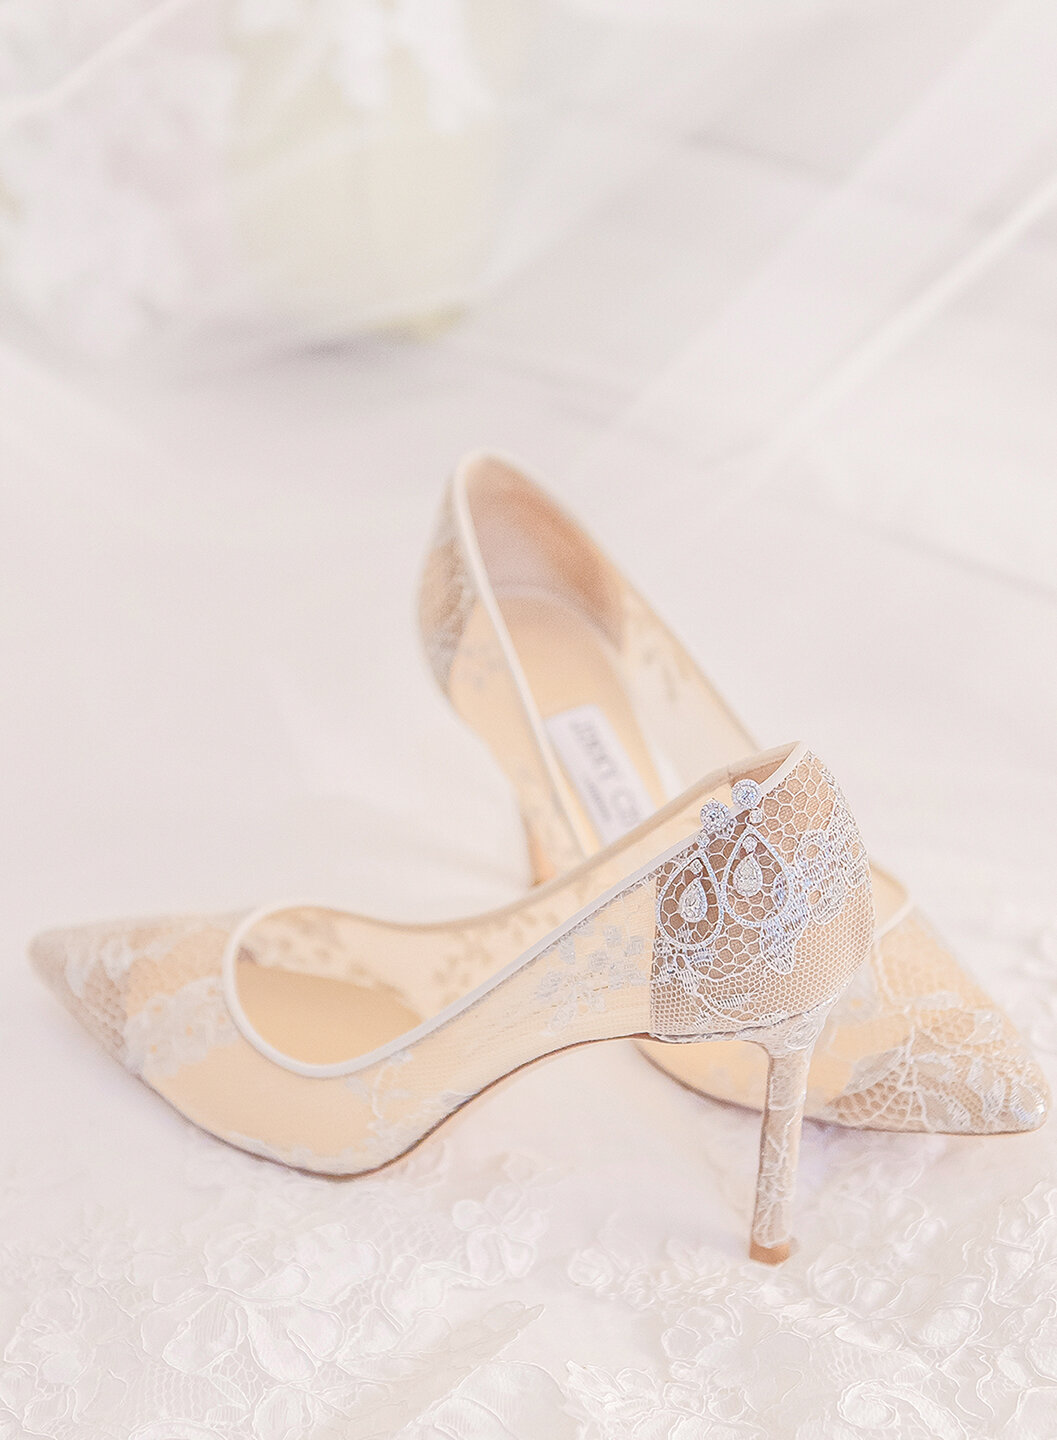 A detail of the bride shoes